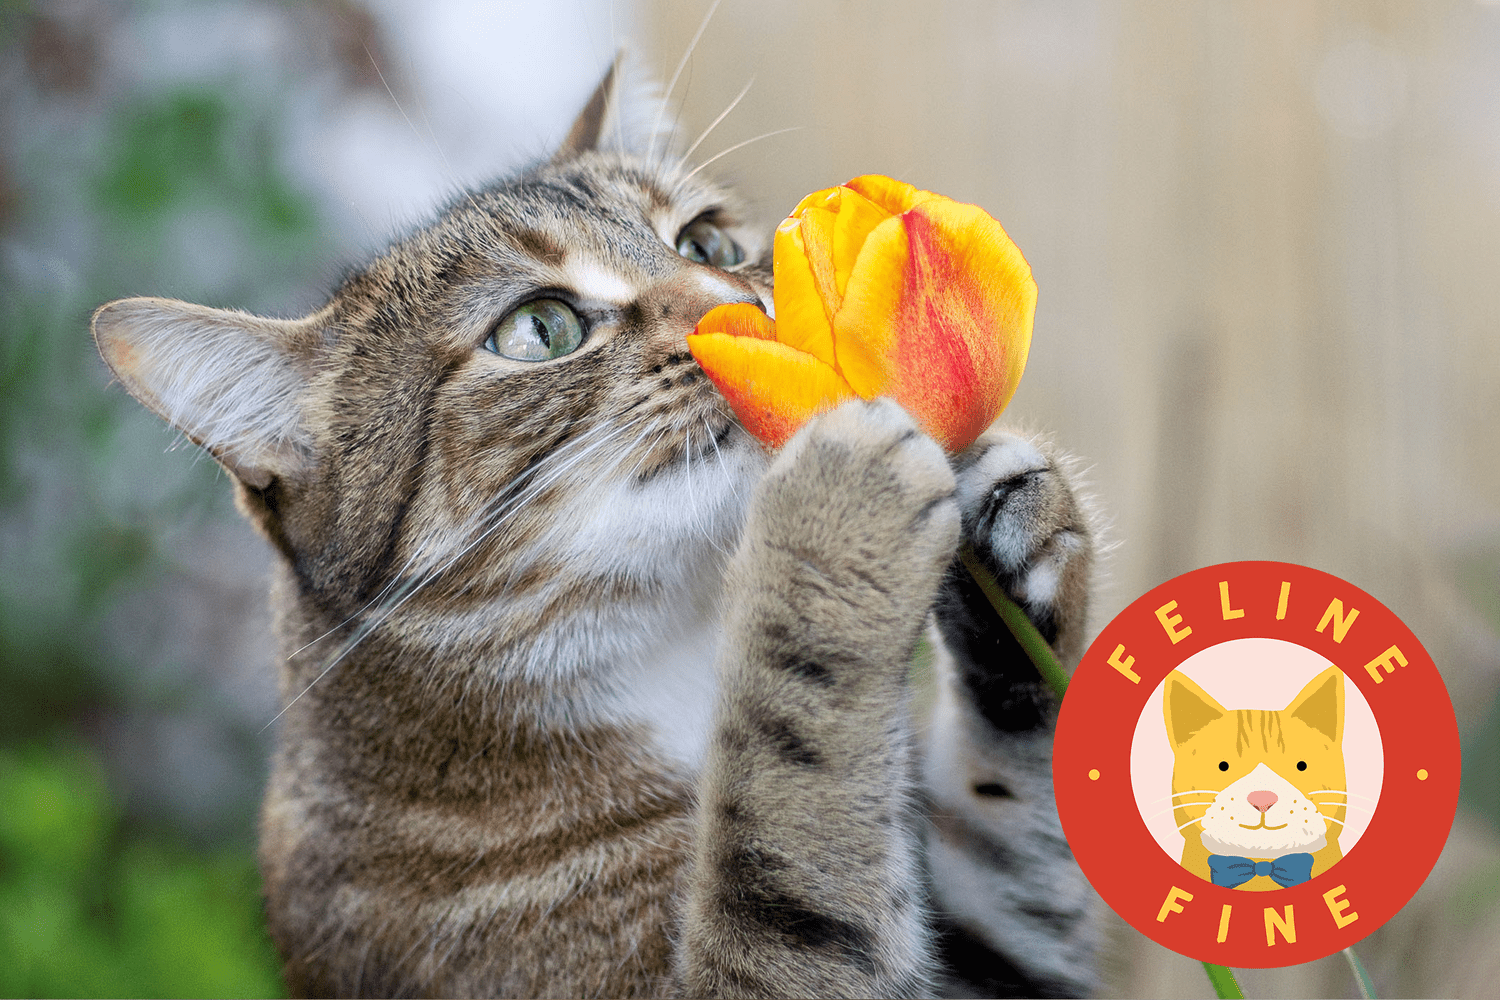 cat sniffing a tulip with feline fine logo